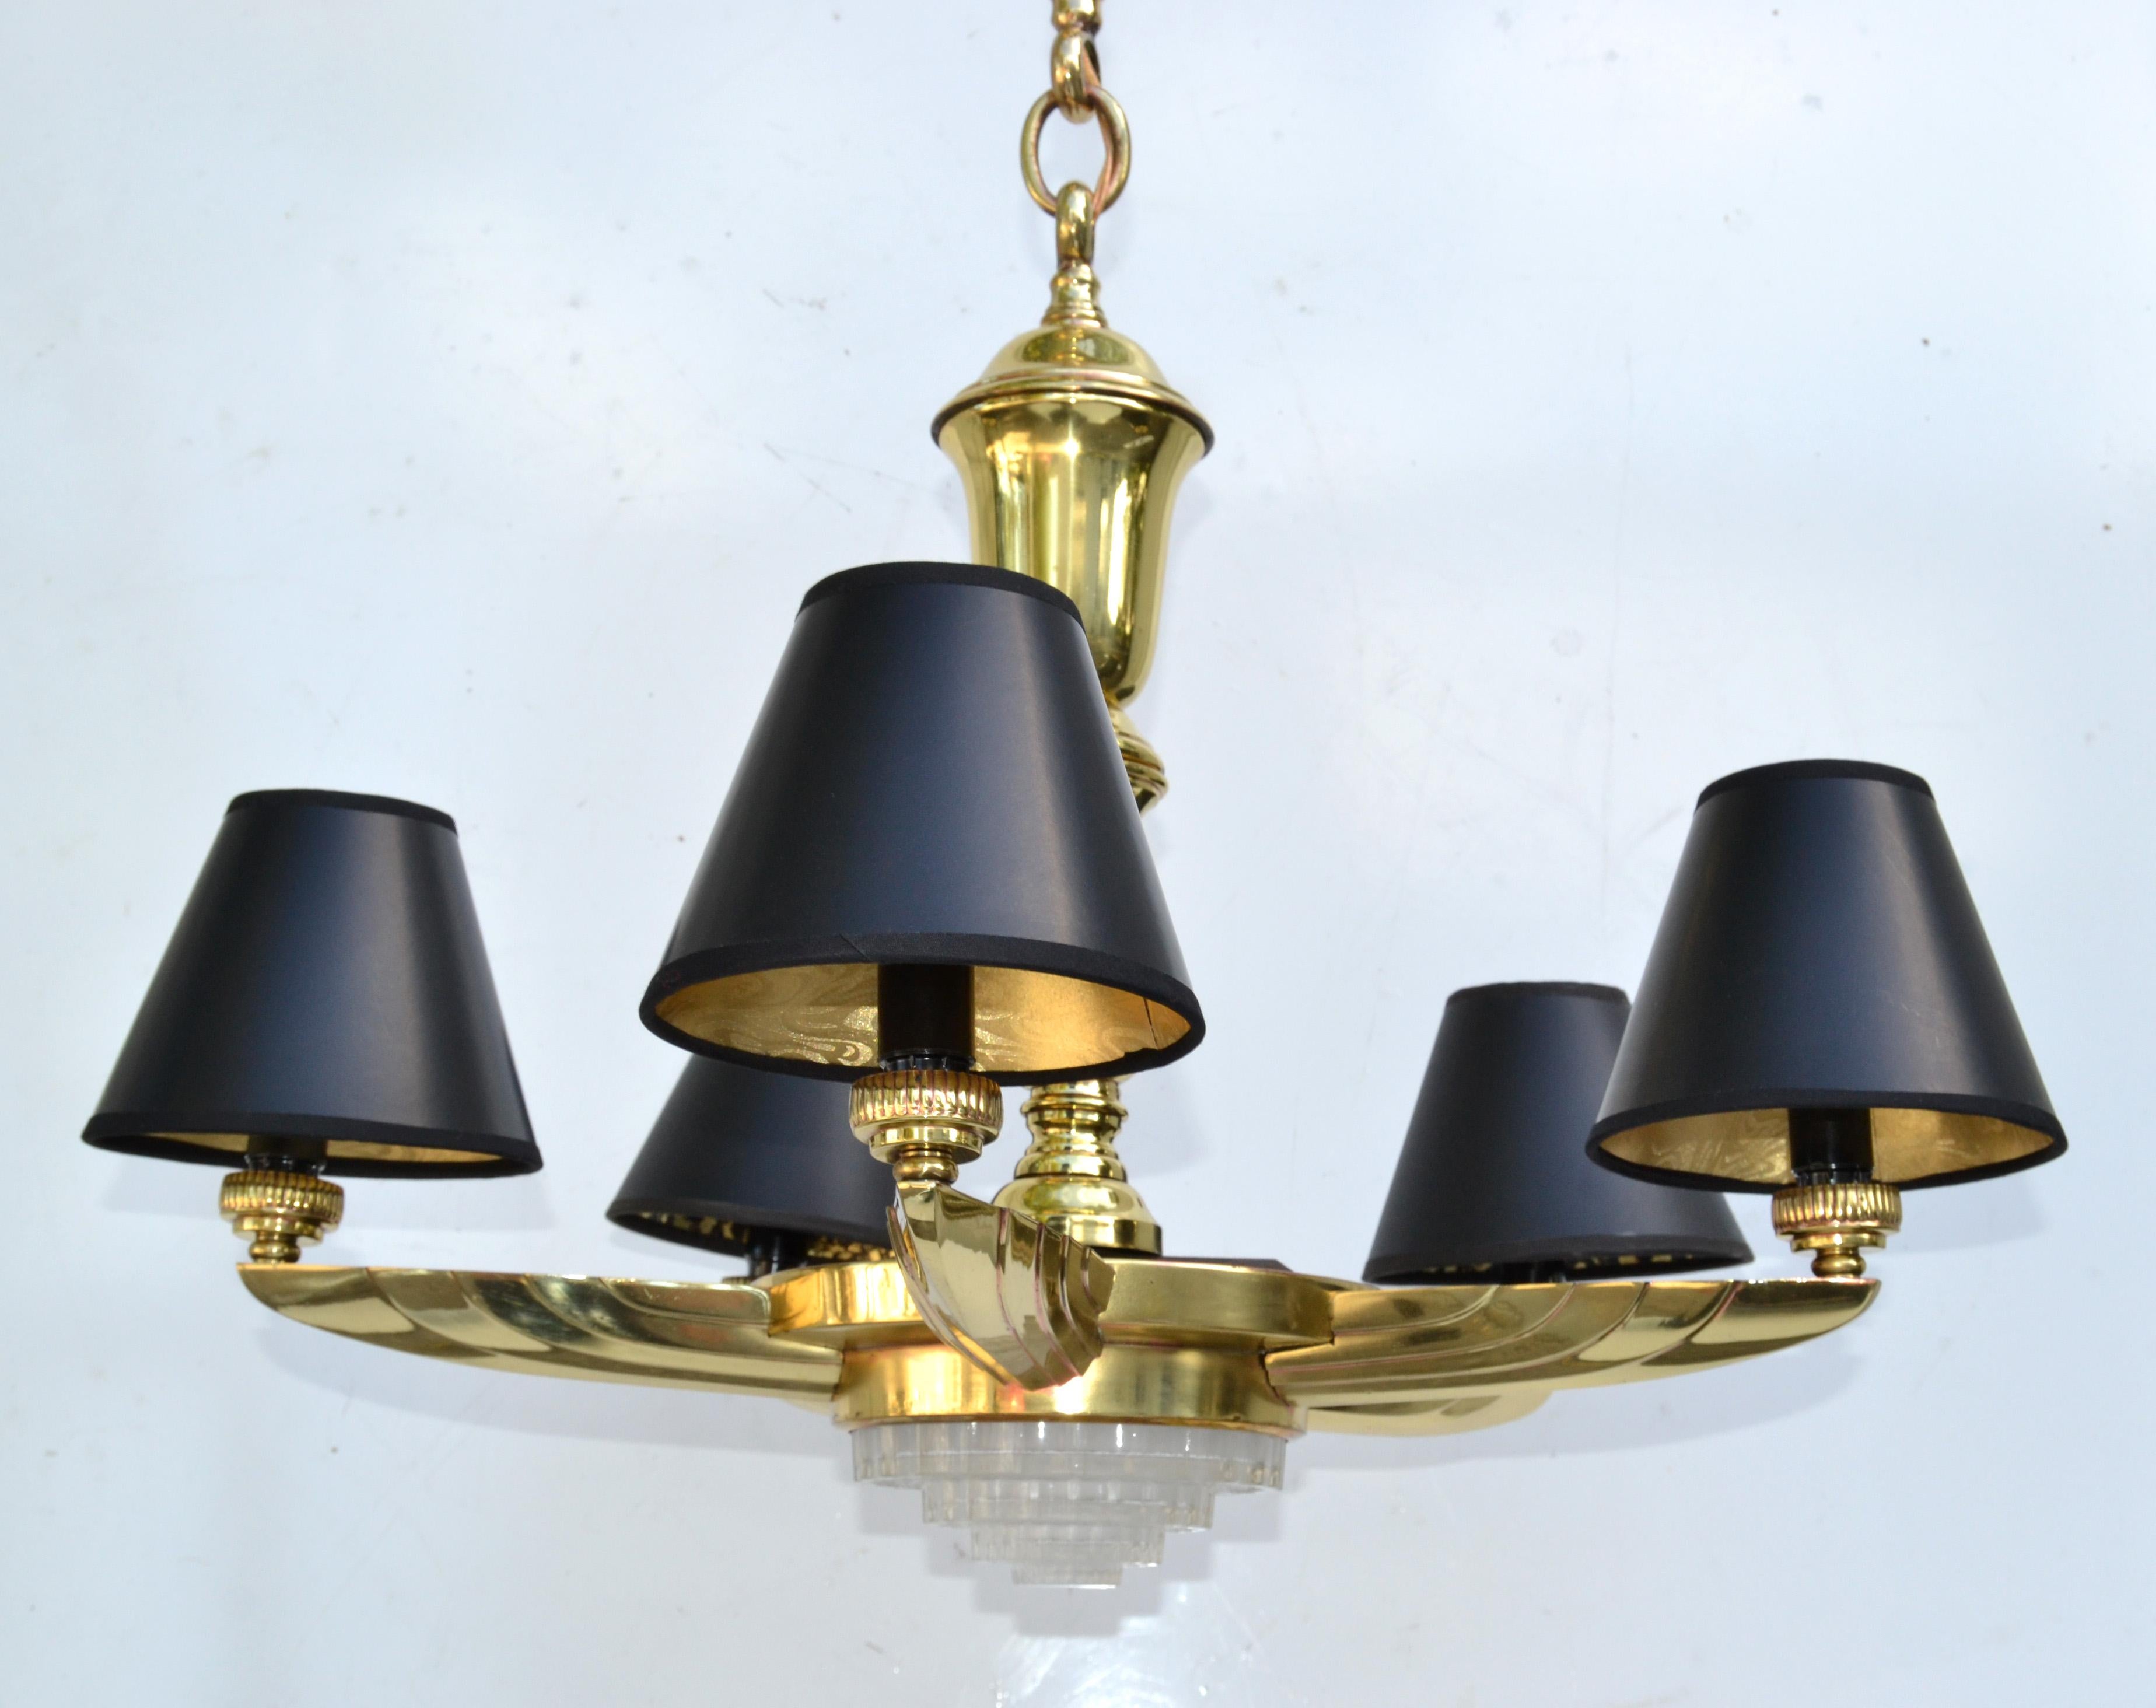 Atelier Petitot style French neoclassical round 6 light chandelier with black & gold clip on Paper Shades, made in the 1950.
Features 5 cast Bronze scalloped Arms holding a cut glass Centerpiece and fastened with Brass Modules as Stem.
Comes with